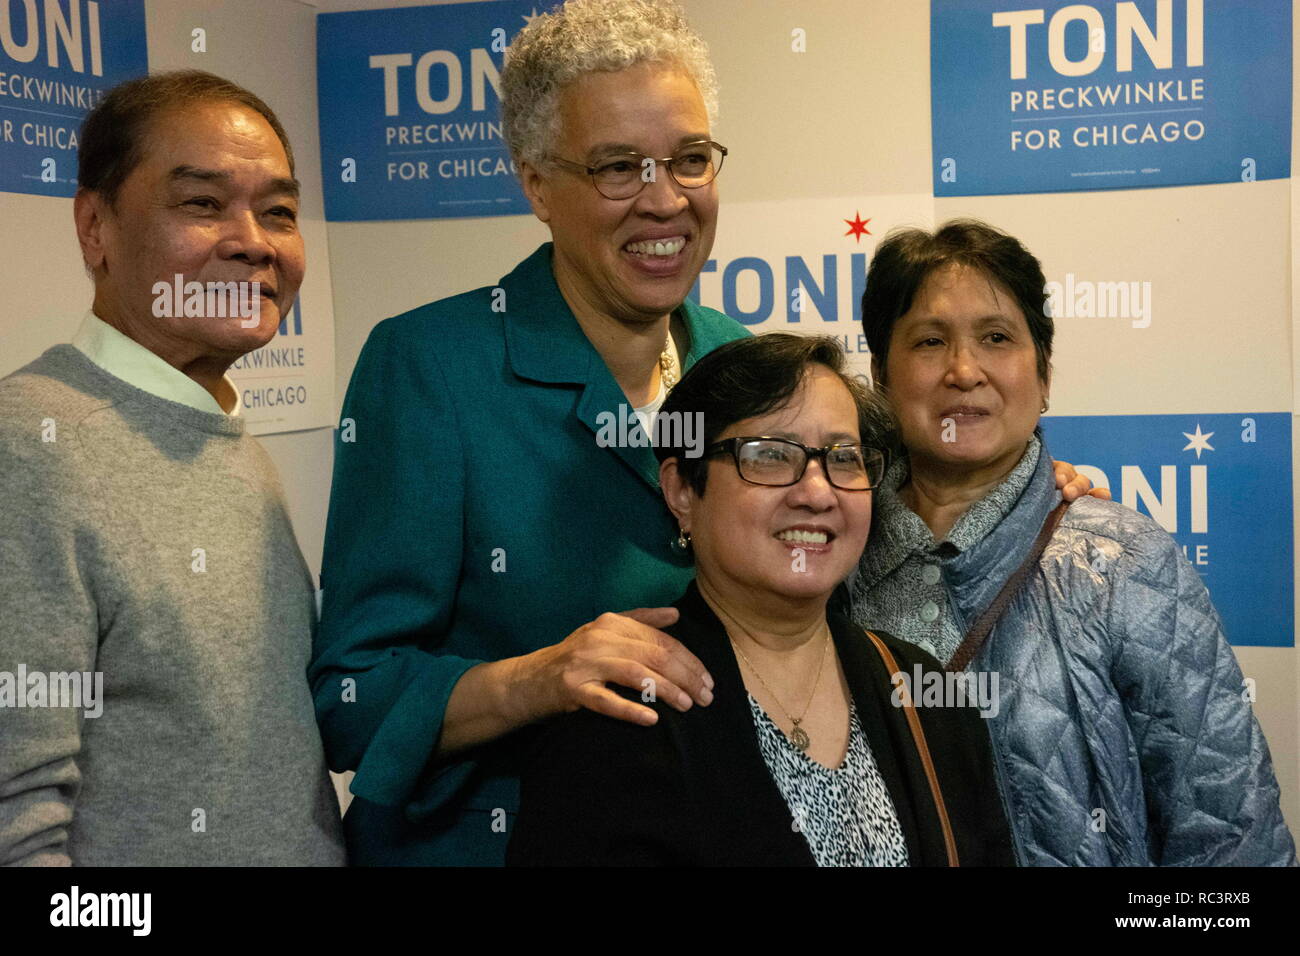 Chicago, Illinios, USA. 12th Jan, 2019. Chicago mayoral candidate TONI PRECKWINKLE poses with her supporters at the grand opening of her Northside campaign office. Credit: Karen I. Hirsch/ZUMA Wire/Alamy Live News Stock Photo